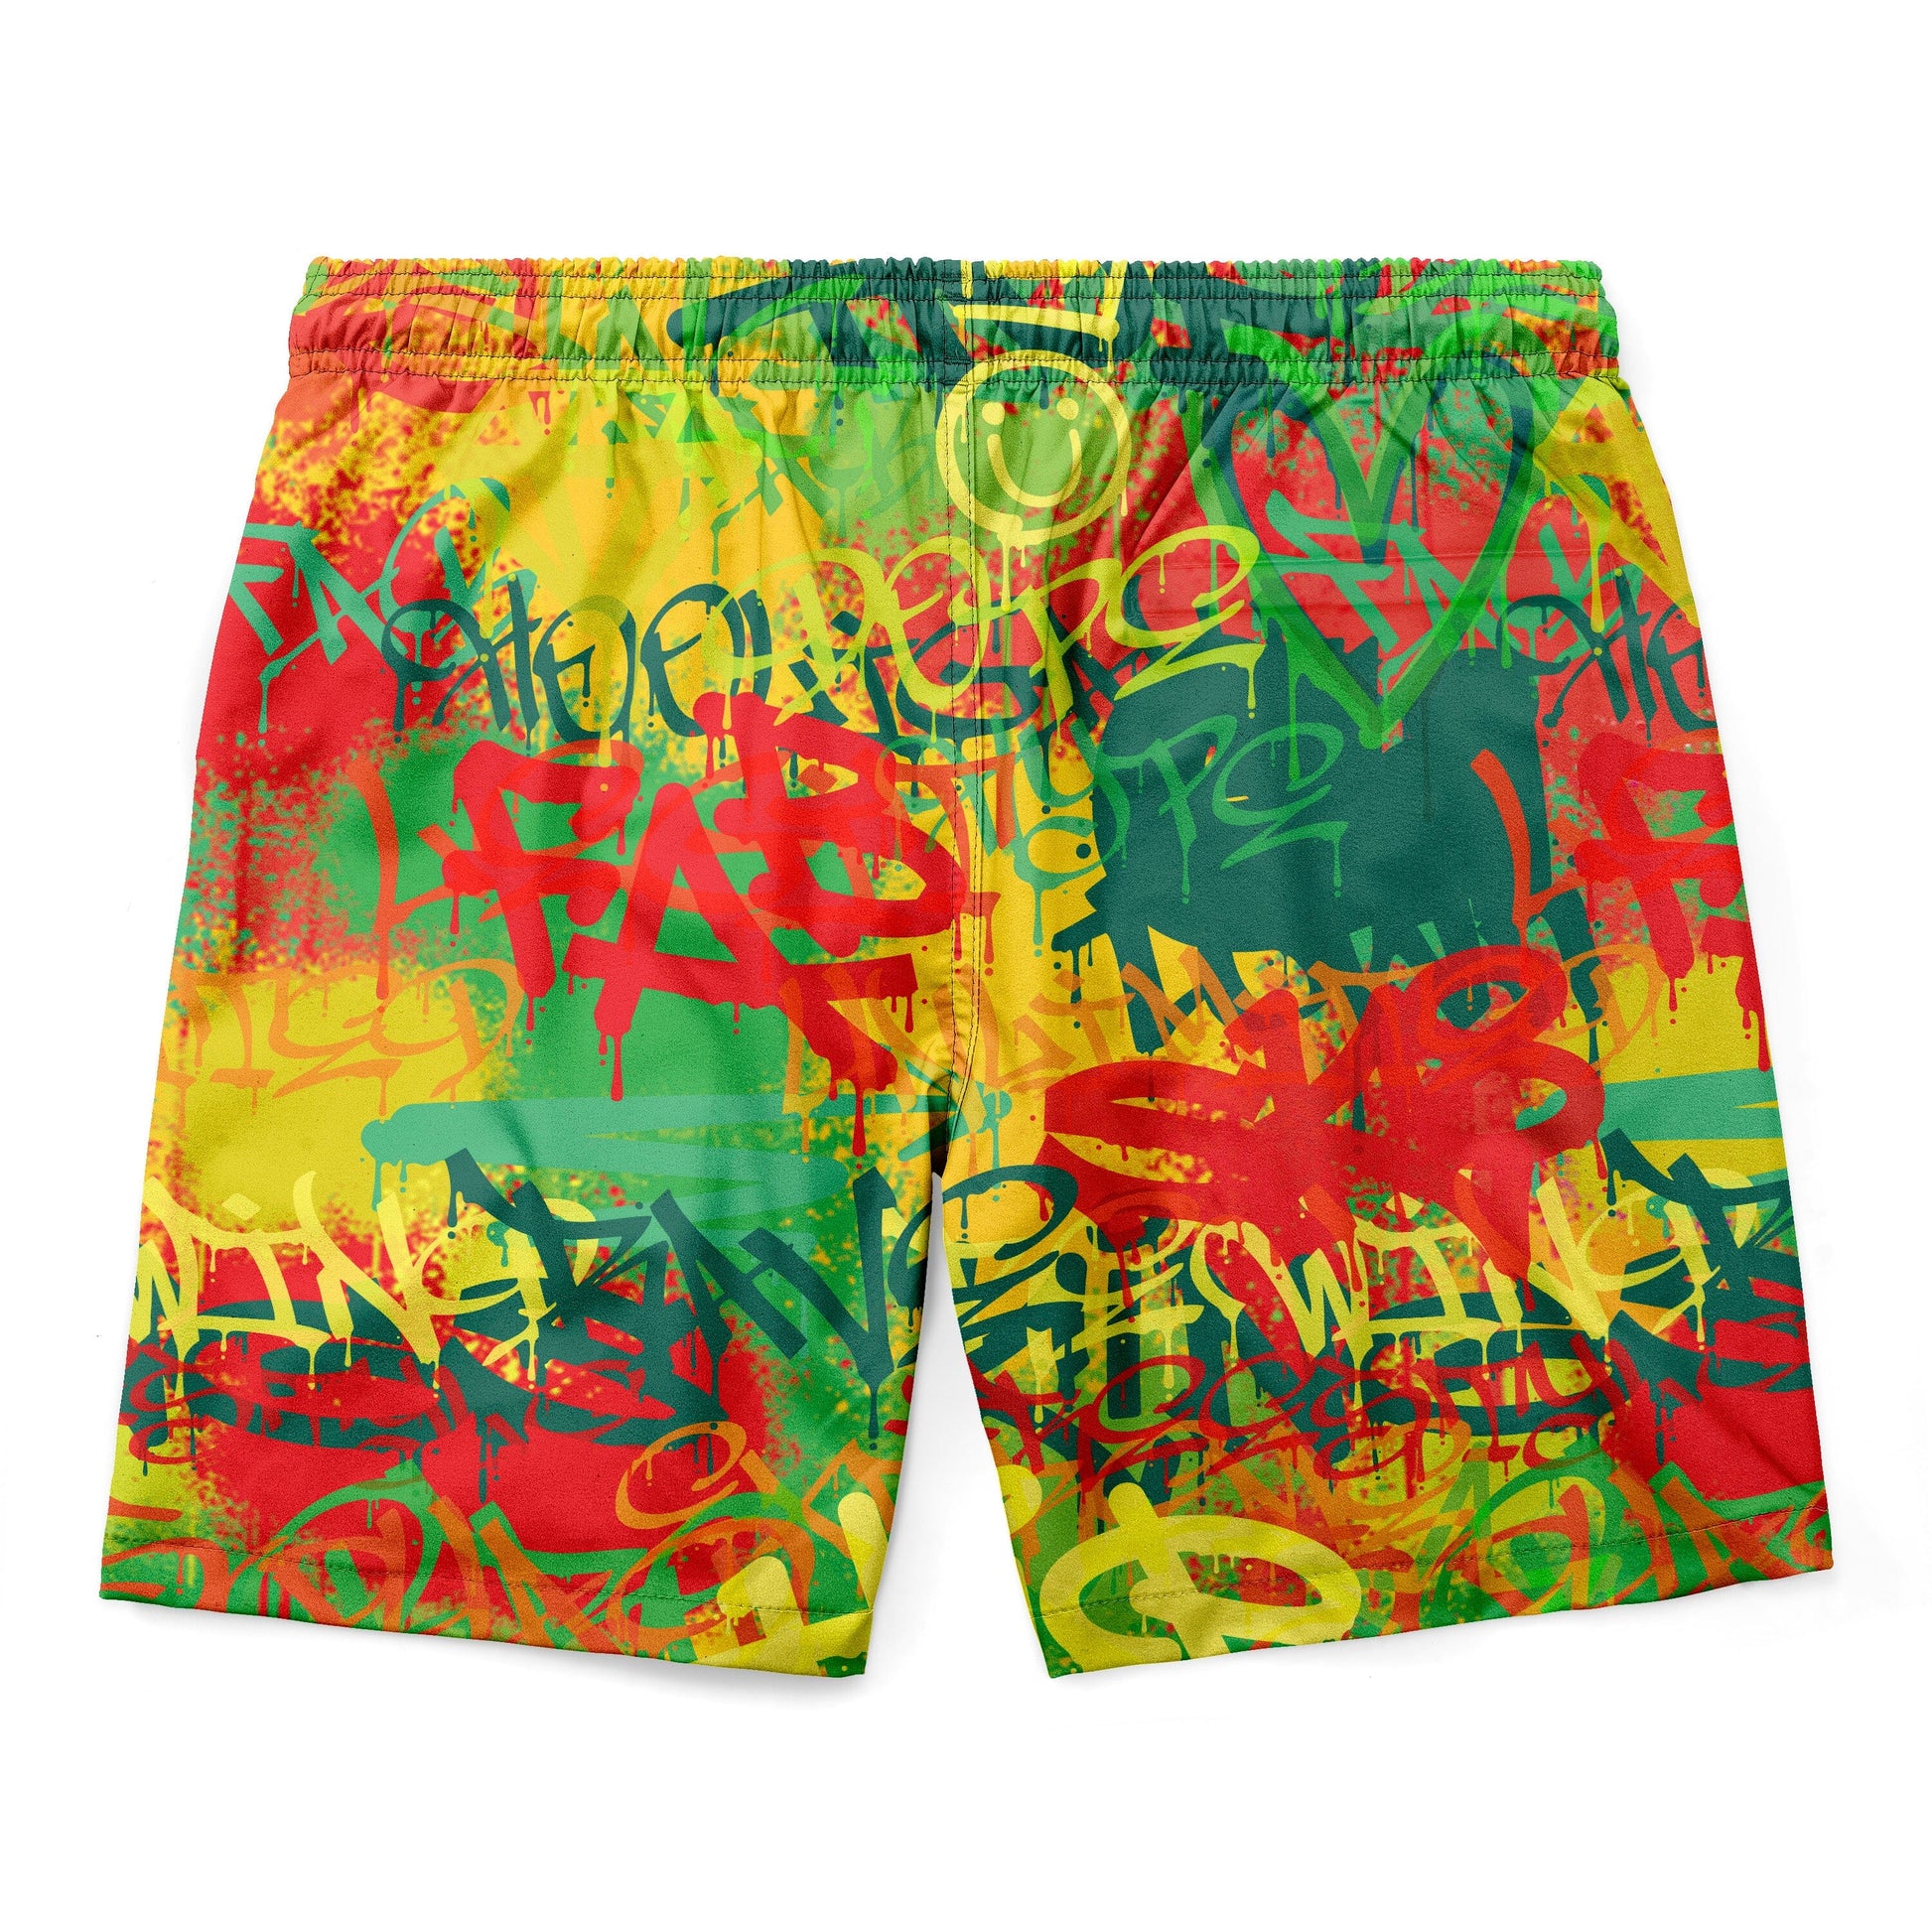 Colorful Unapologetically Shorts Shorts Tianci 